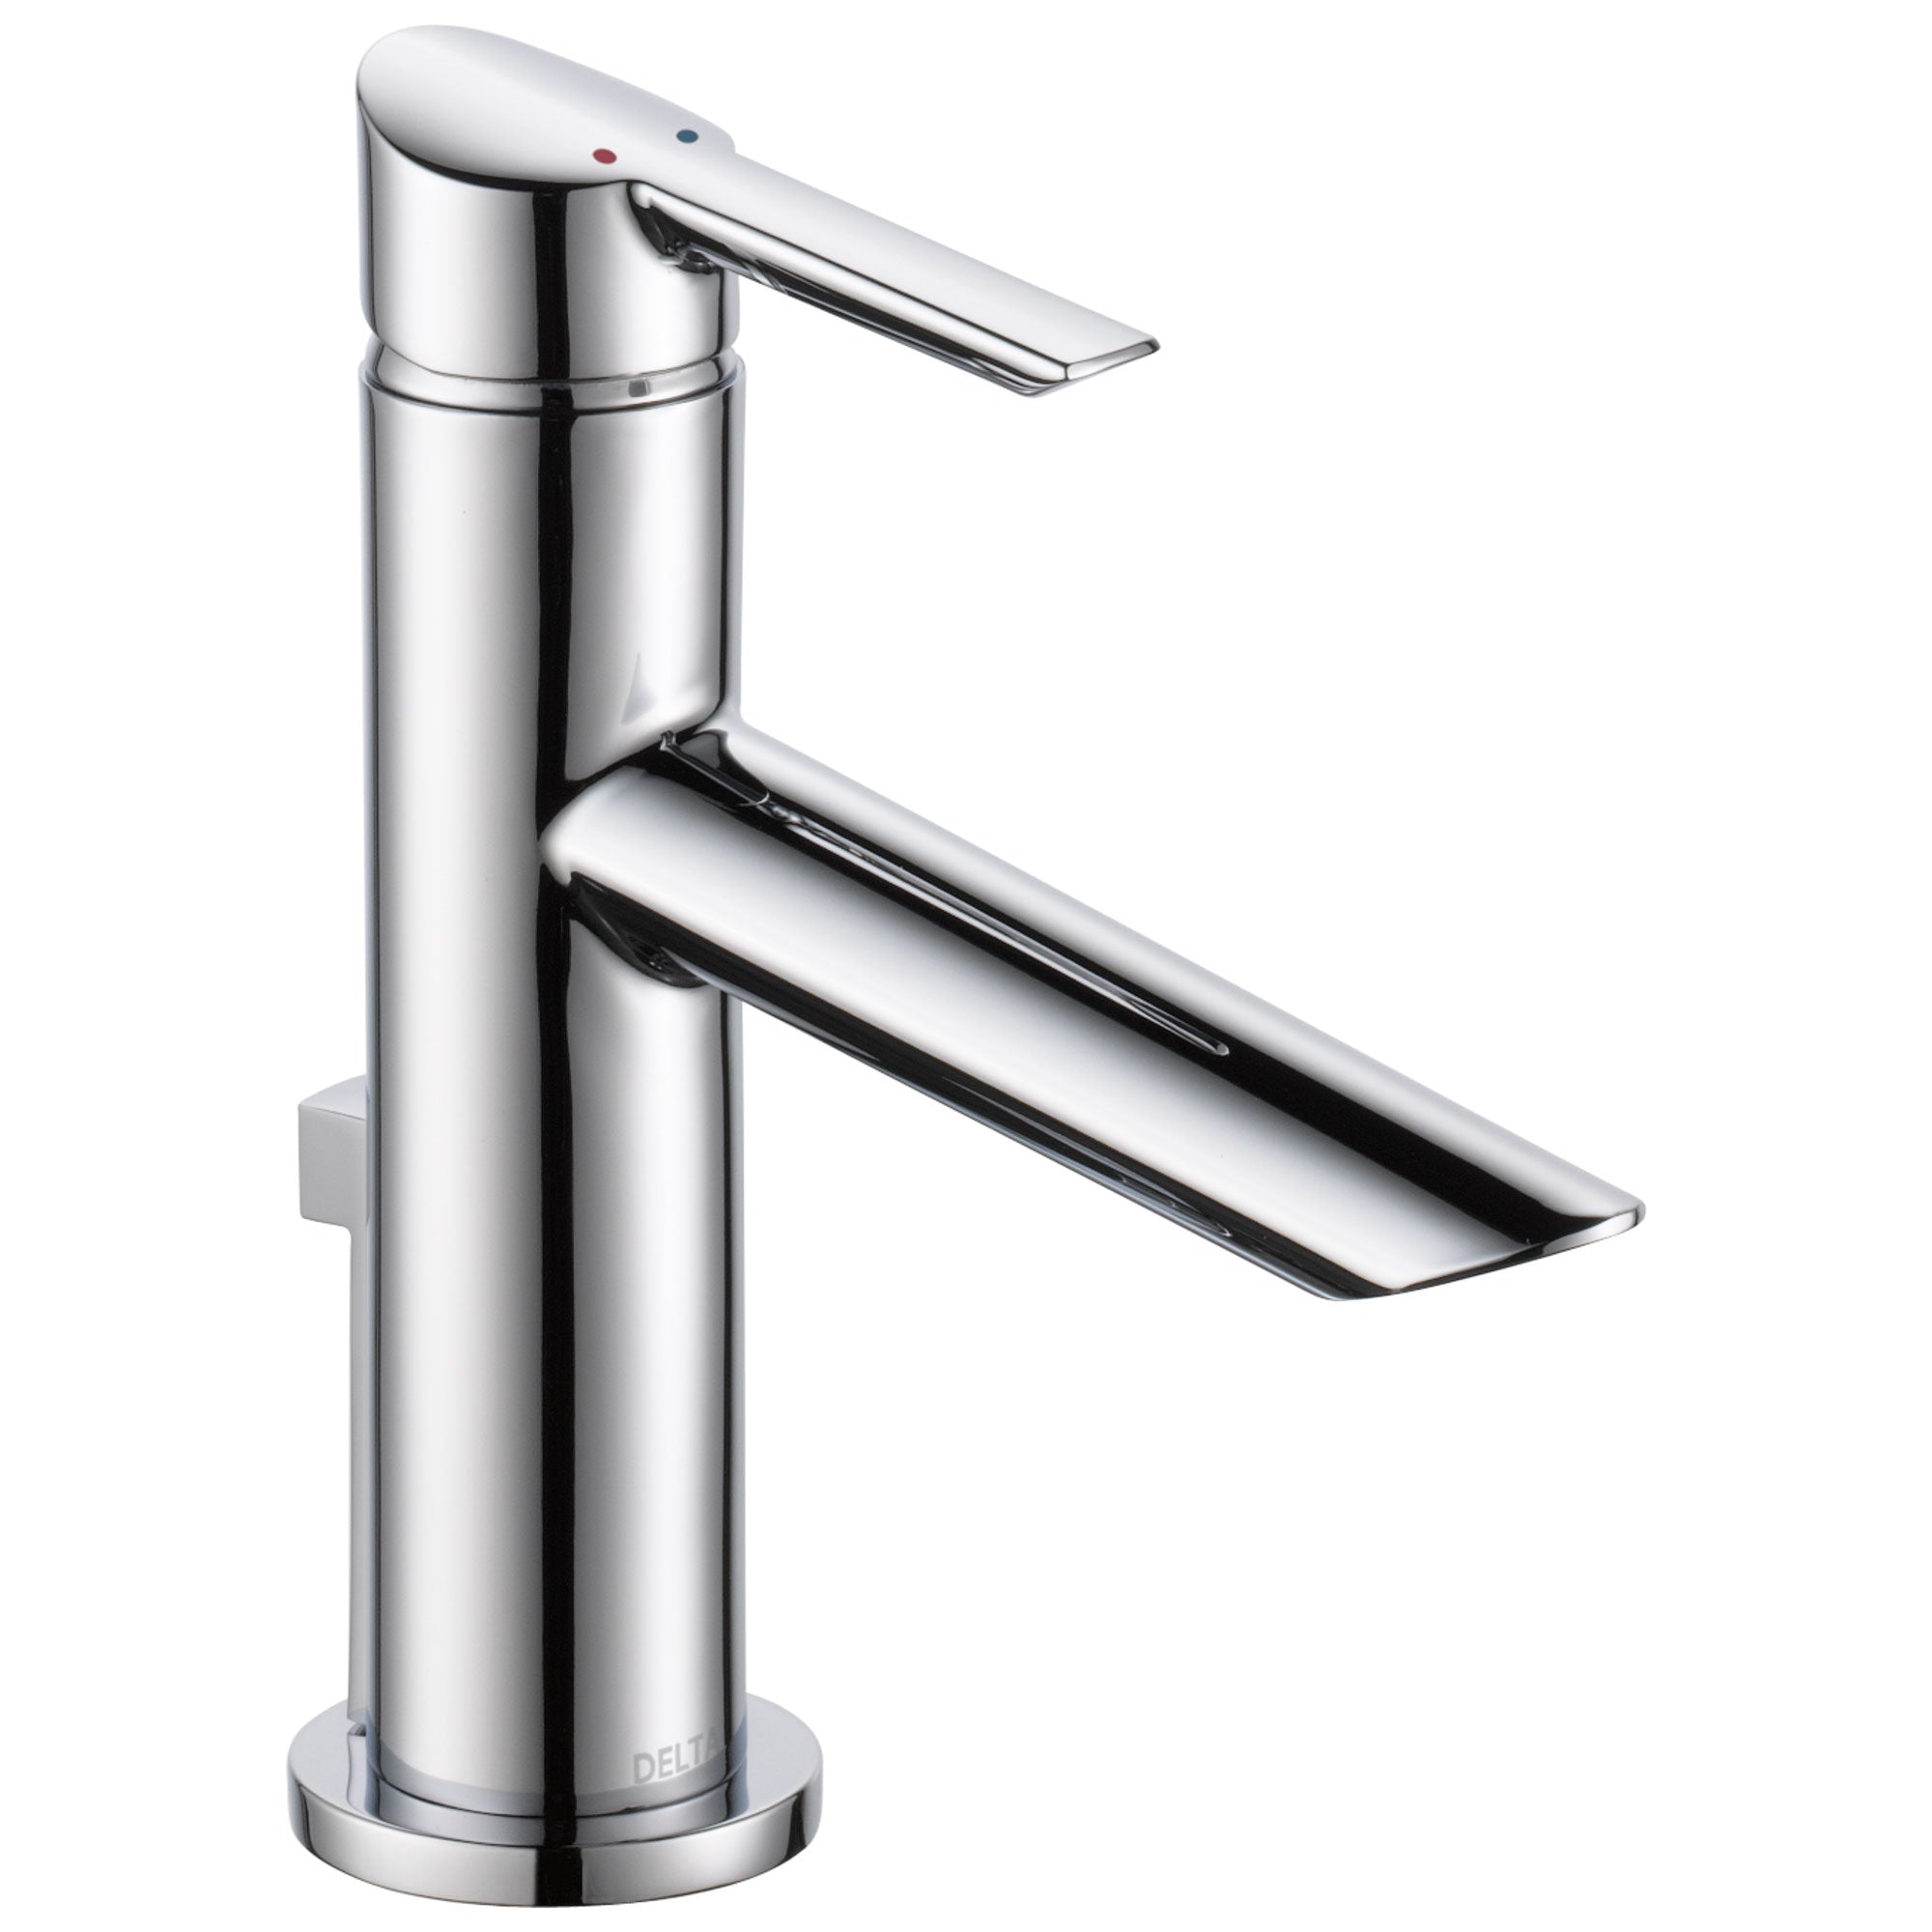 Delta Compel Collection Chrome Finish Single Handle Water Efficient Modern Bathroom Sink Lavatory Faucet with Metal Pop-up Drain D561GPMDST